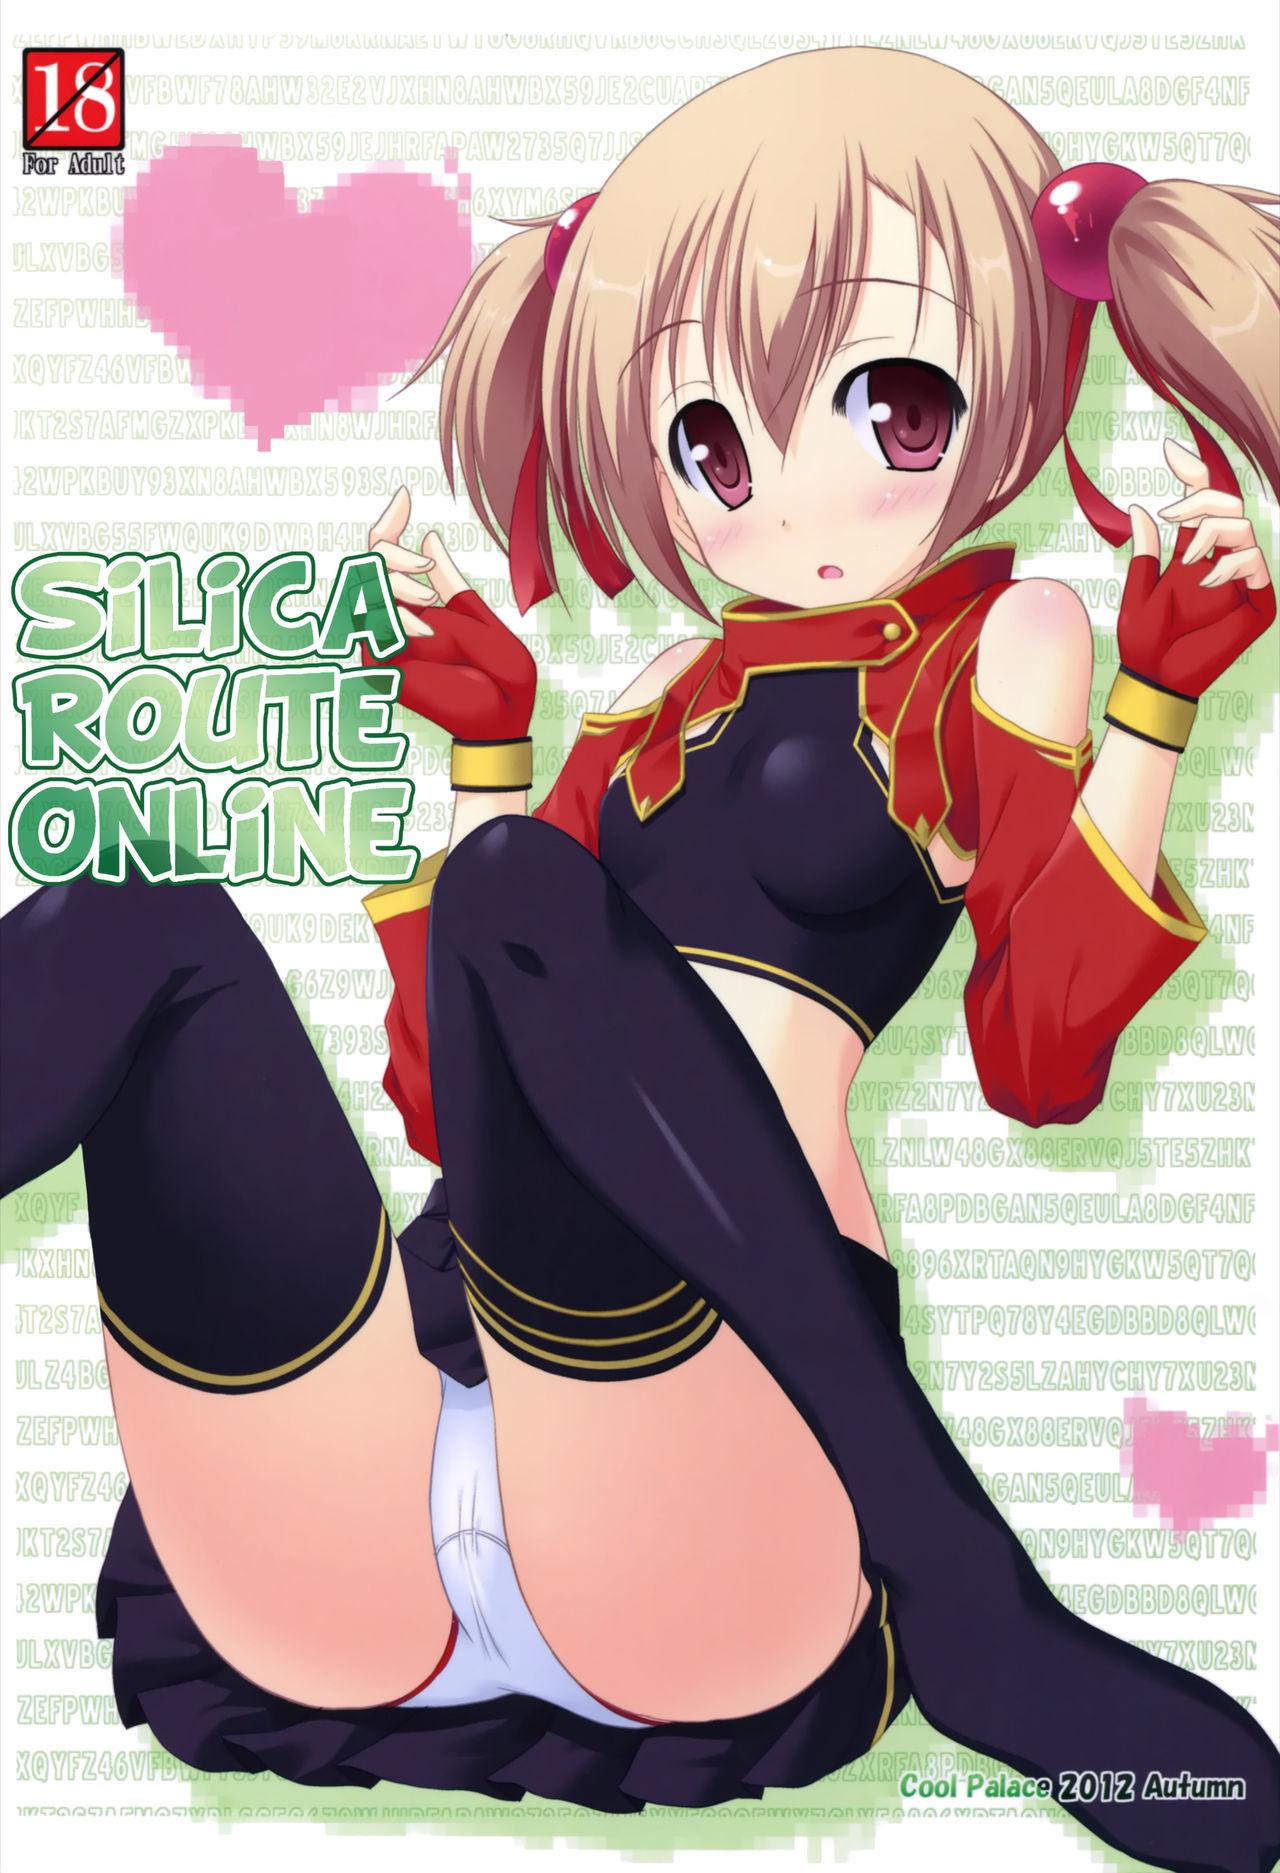 Big Black Dick Silica Route Online - Sword art online Pure18 - Page 1